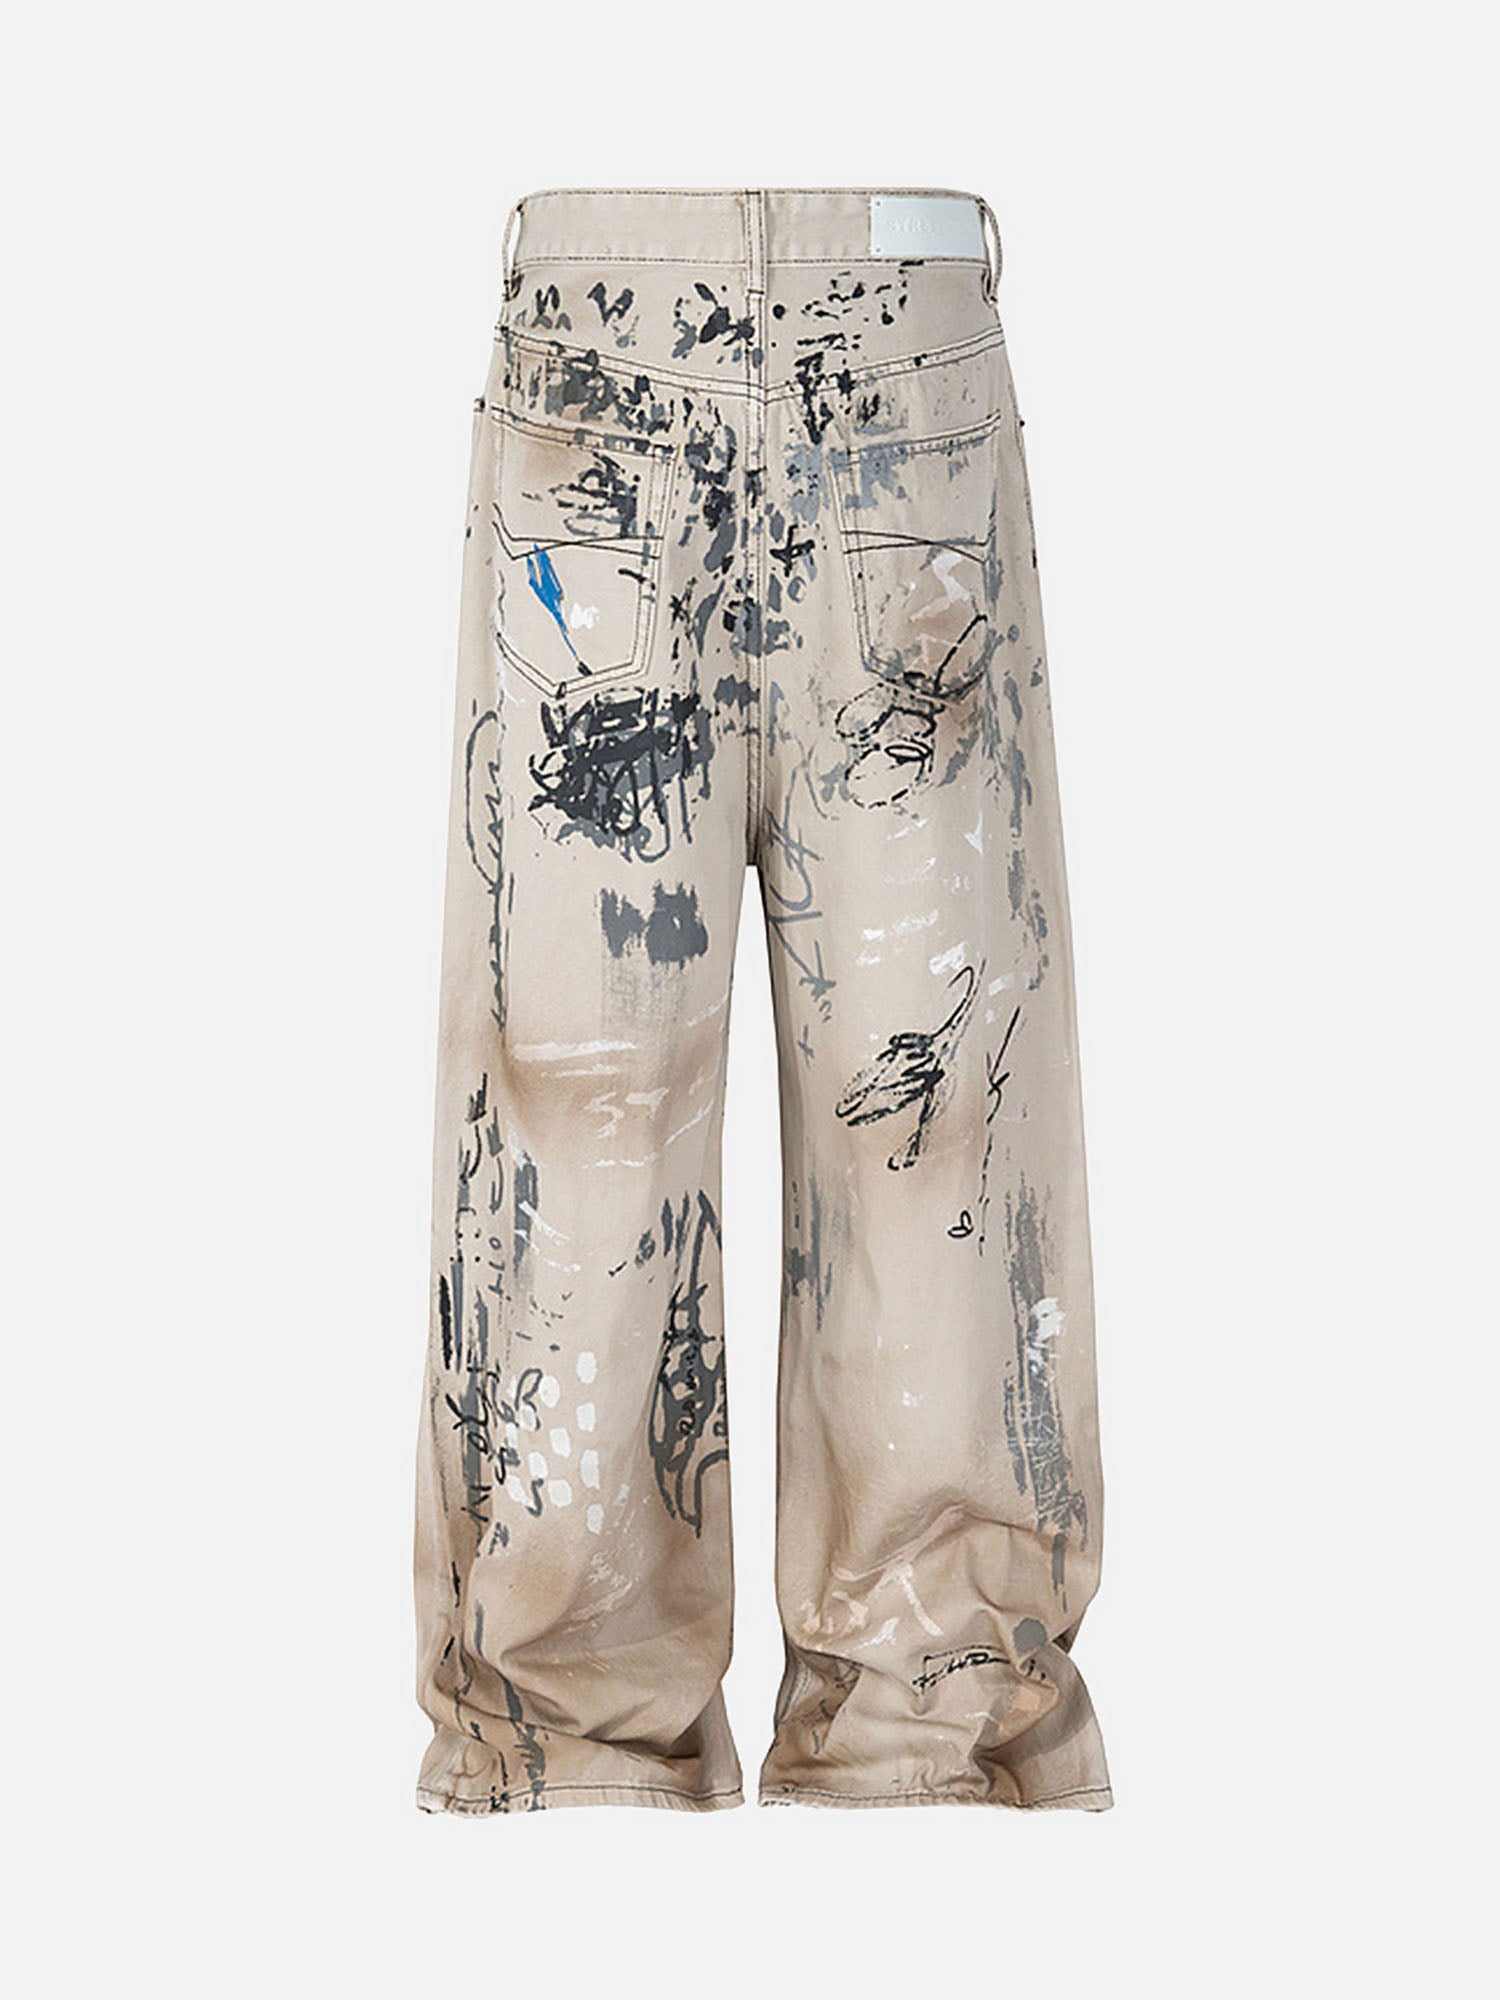 Thesupermade Hand-painted Graffiti Baggy Jeans - 1885